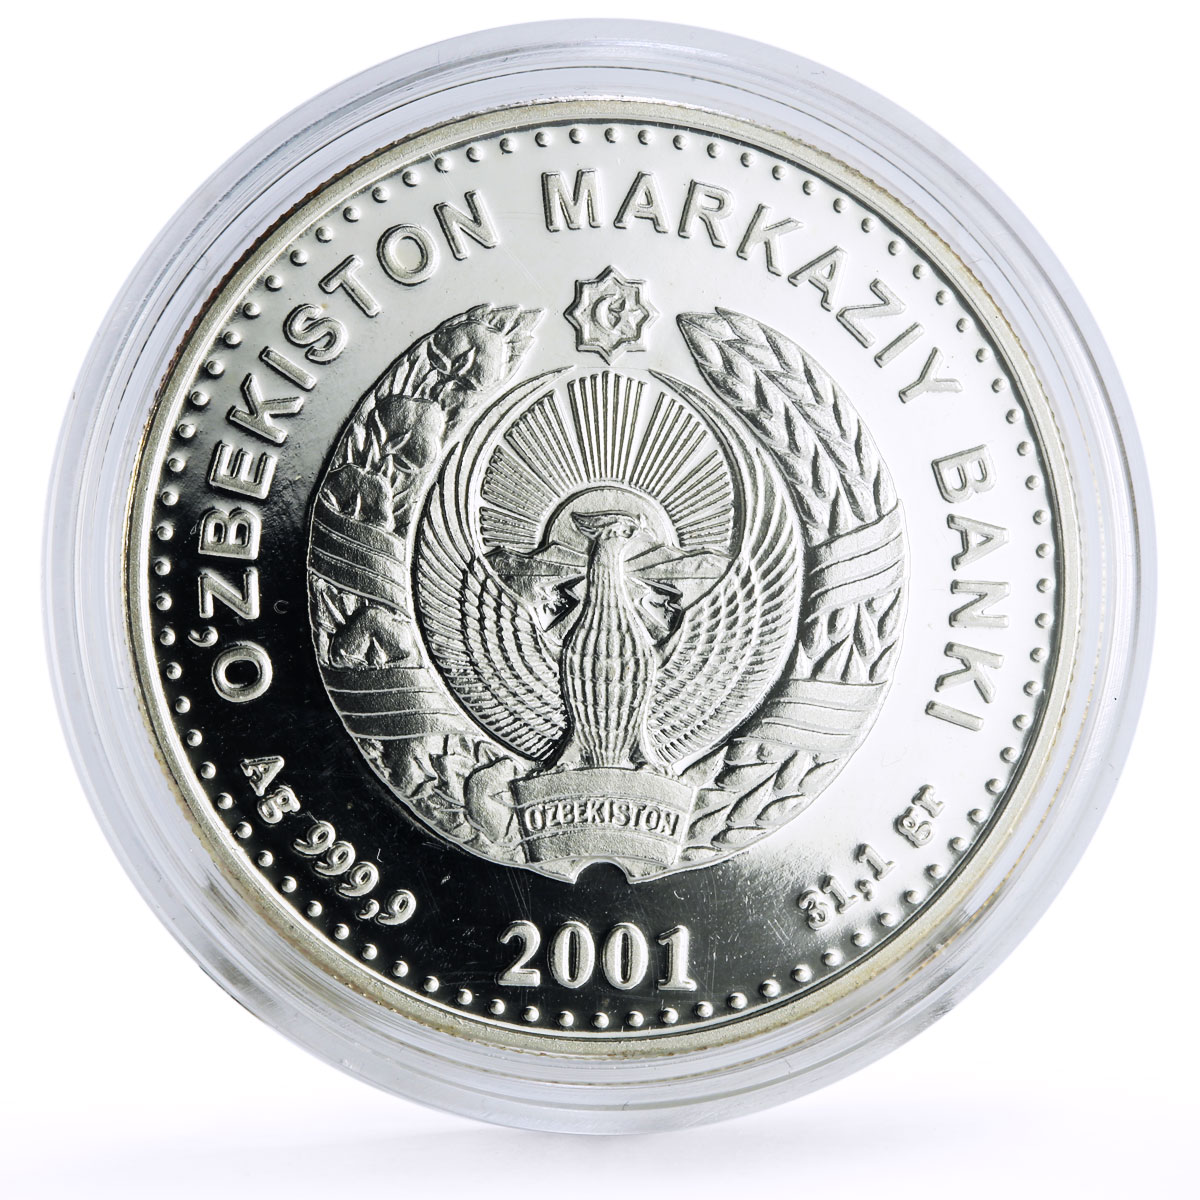 Uzbekistan 100 som Independence Alisher Navoi Monument KM-28 silver coin 2001